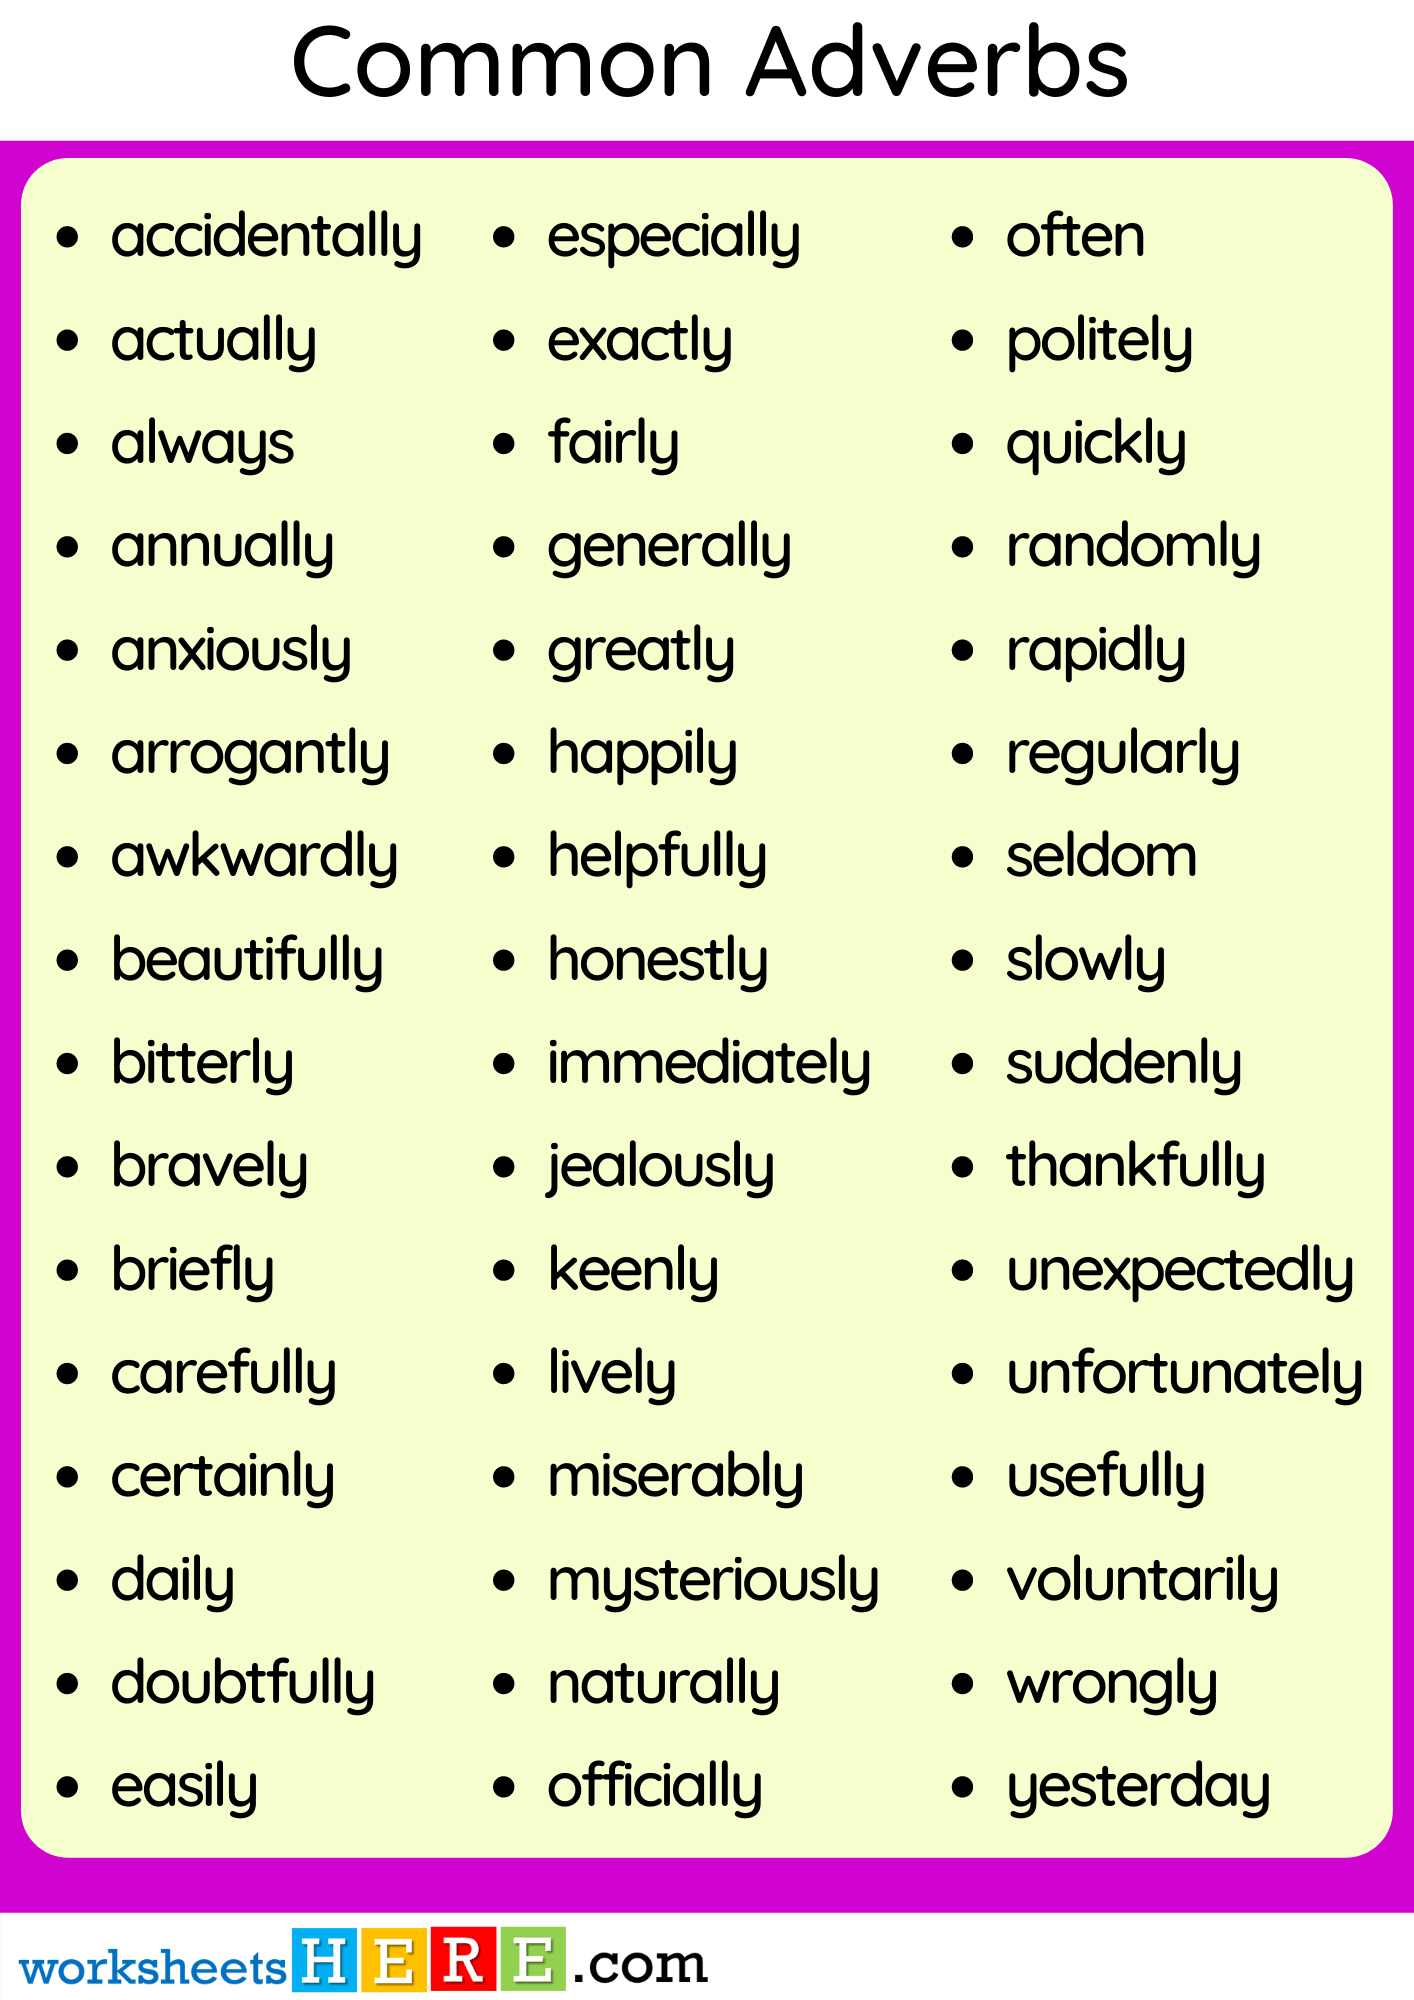 Common Adverbs List in English PDF Worksheet For Kids and Students